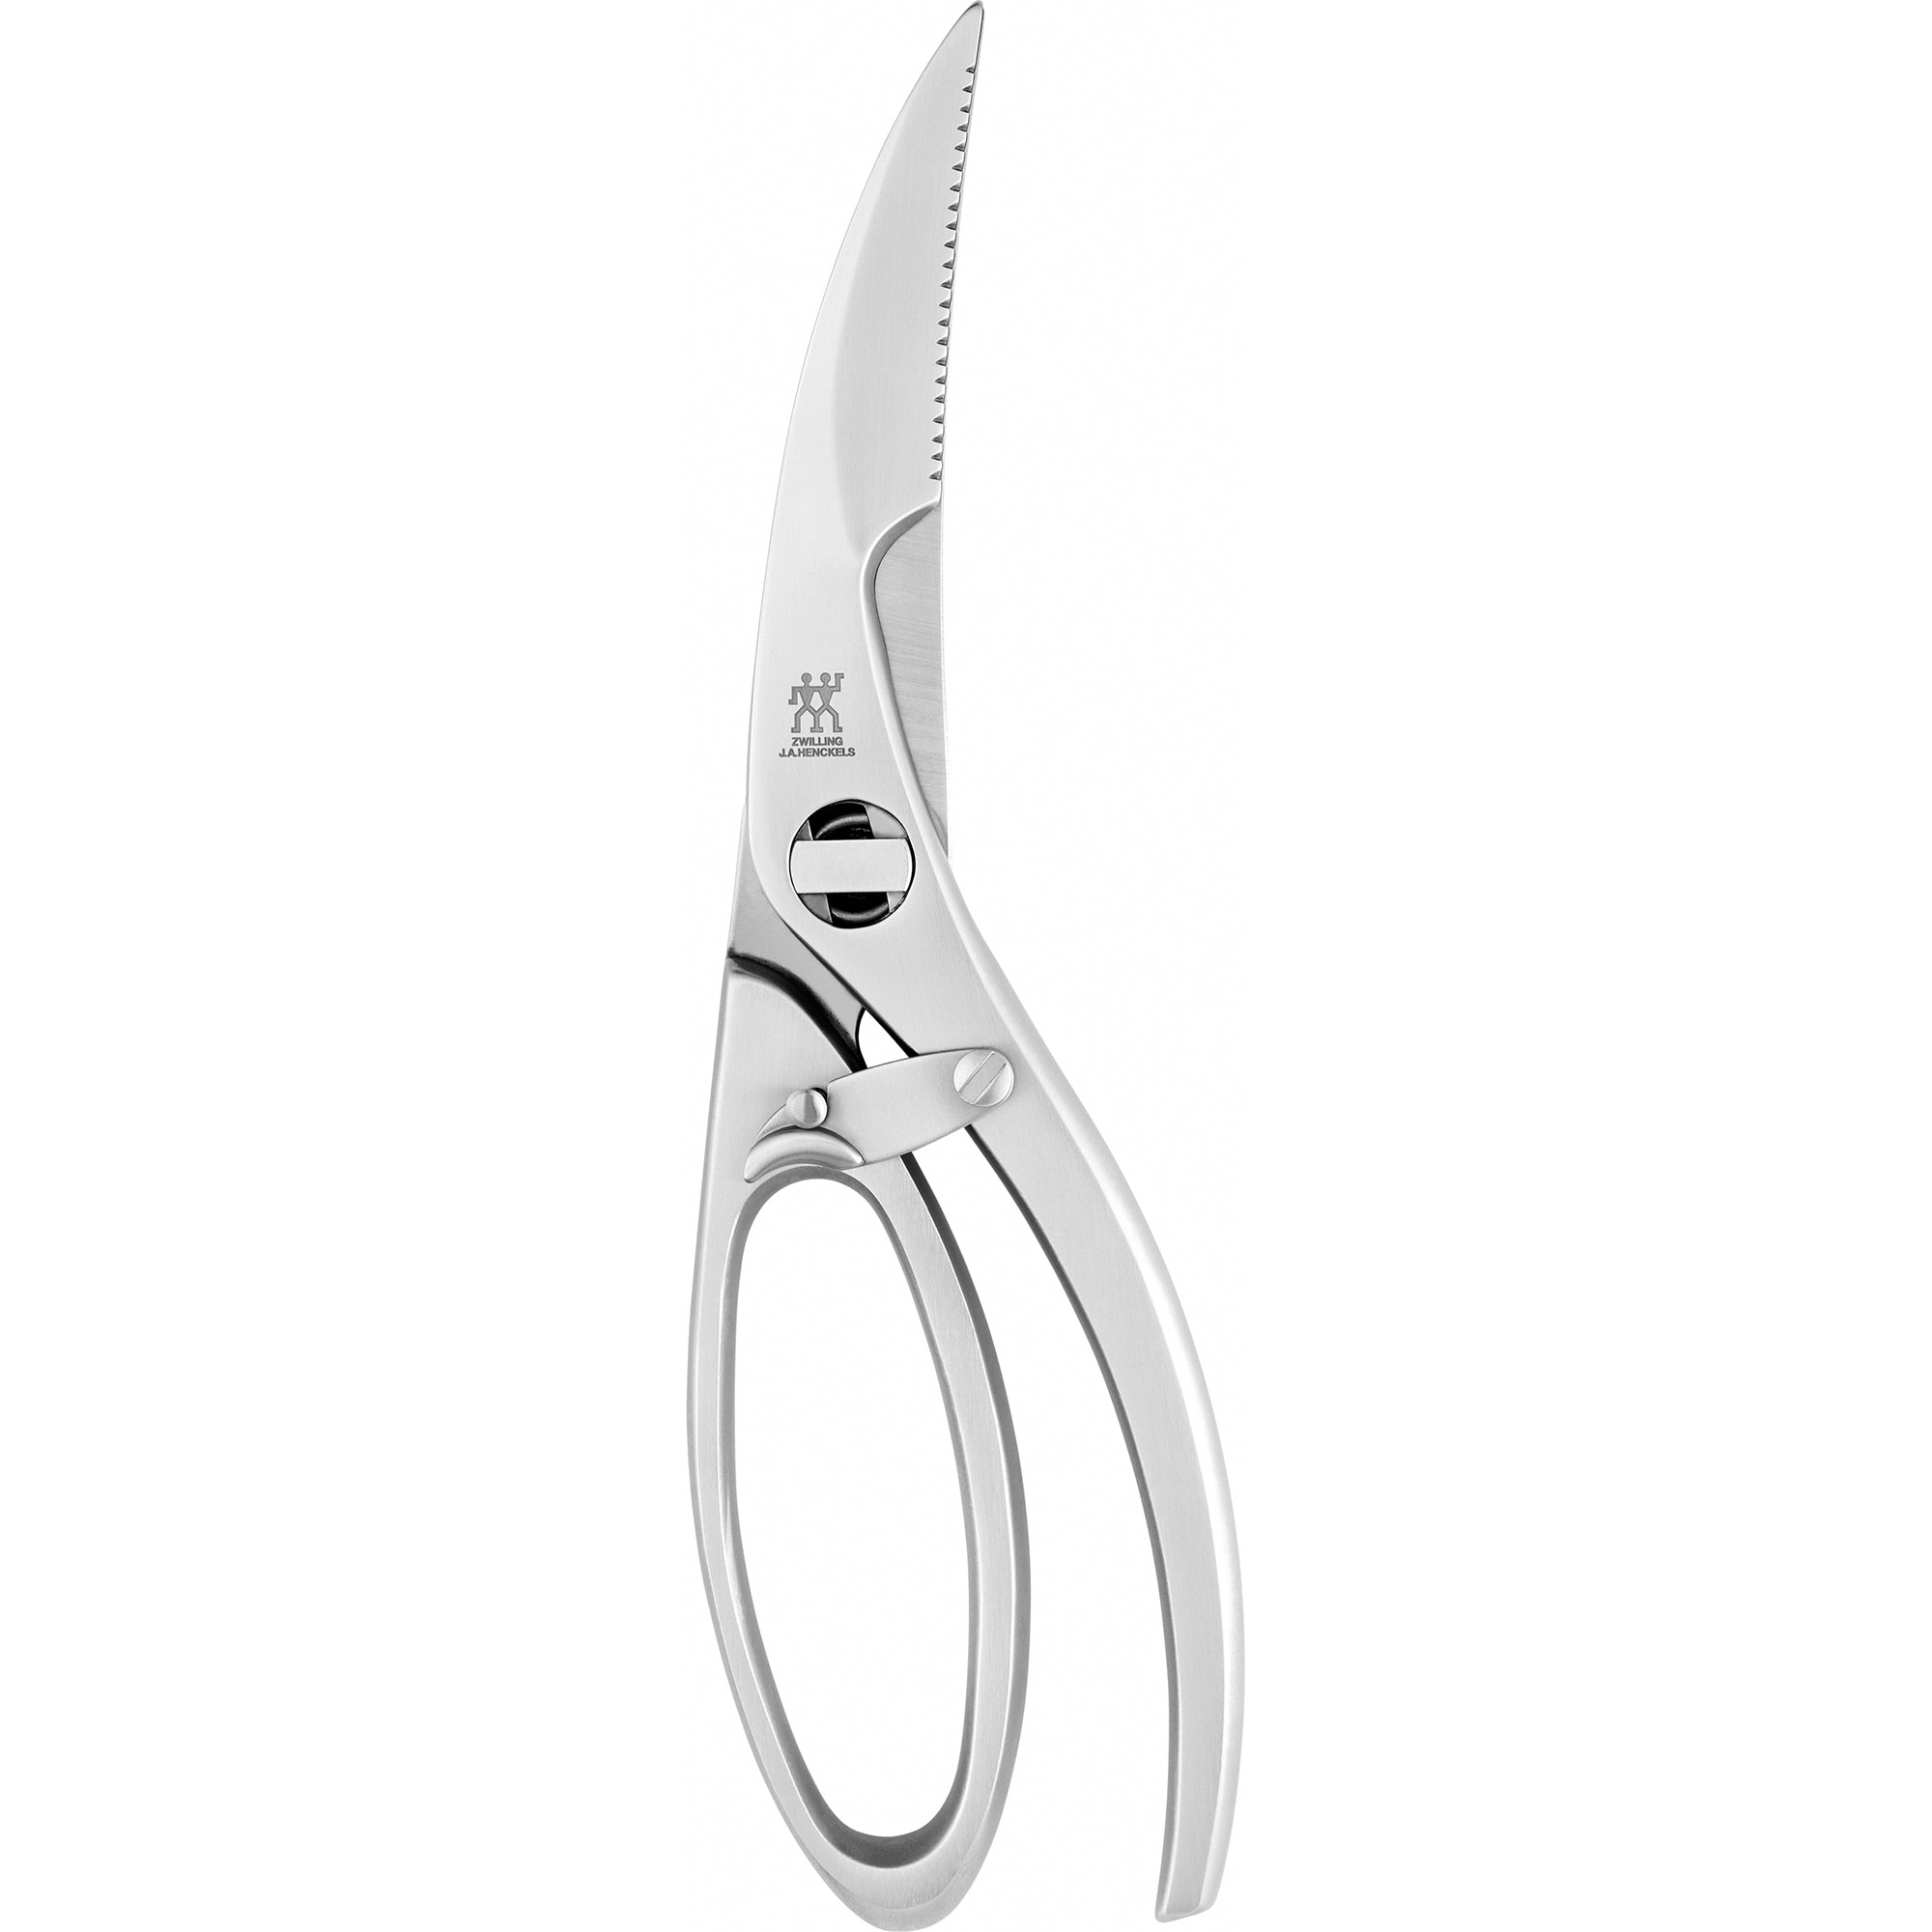 Zwilling ZWILLING J.A. Henckels TWIN Select Take-Apart Poultry Shears -  Stainless Steel Utility Shears, Dishwasher Safe, High Precision Cutting in  the Cutlery department at